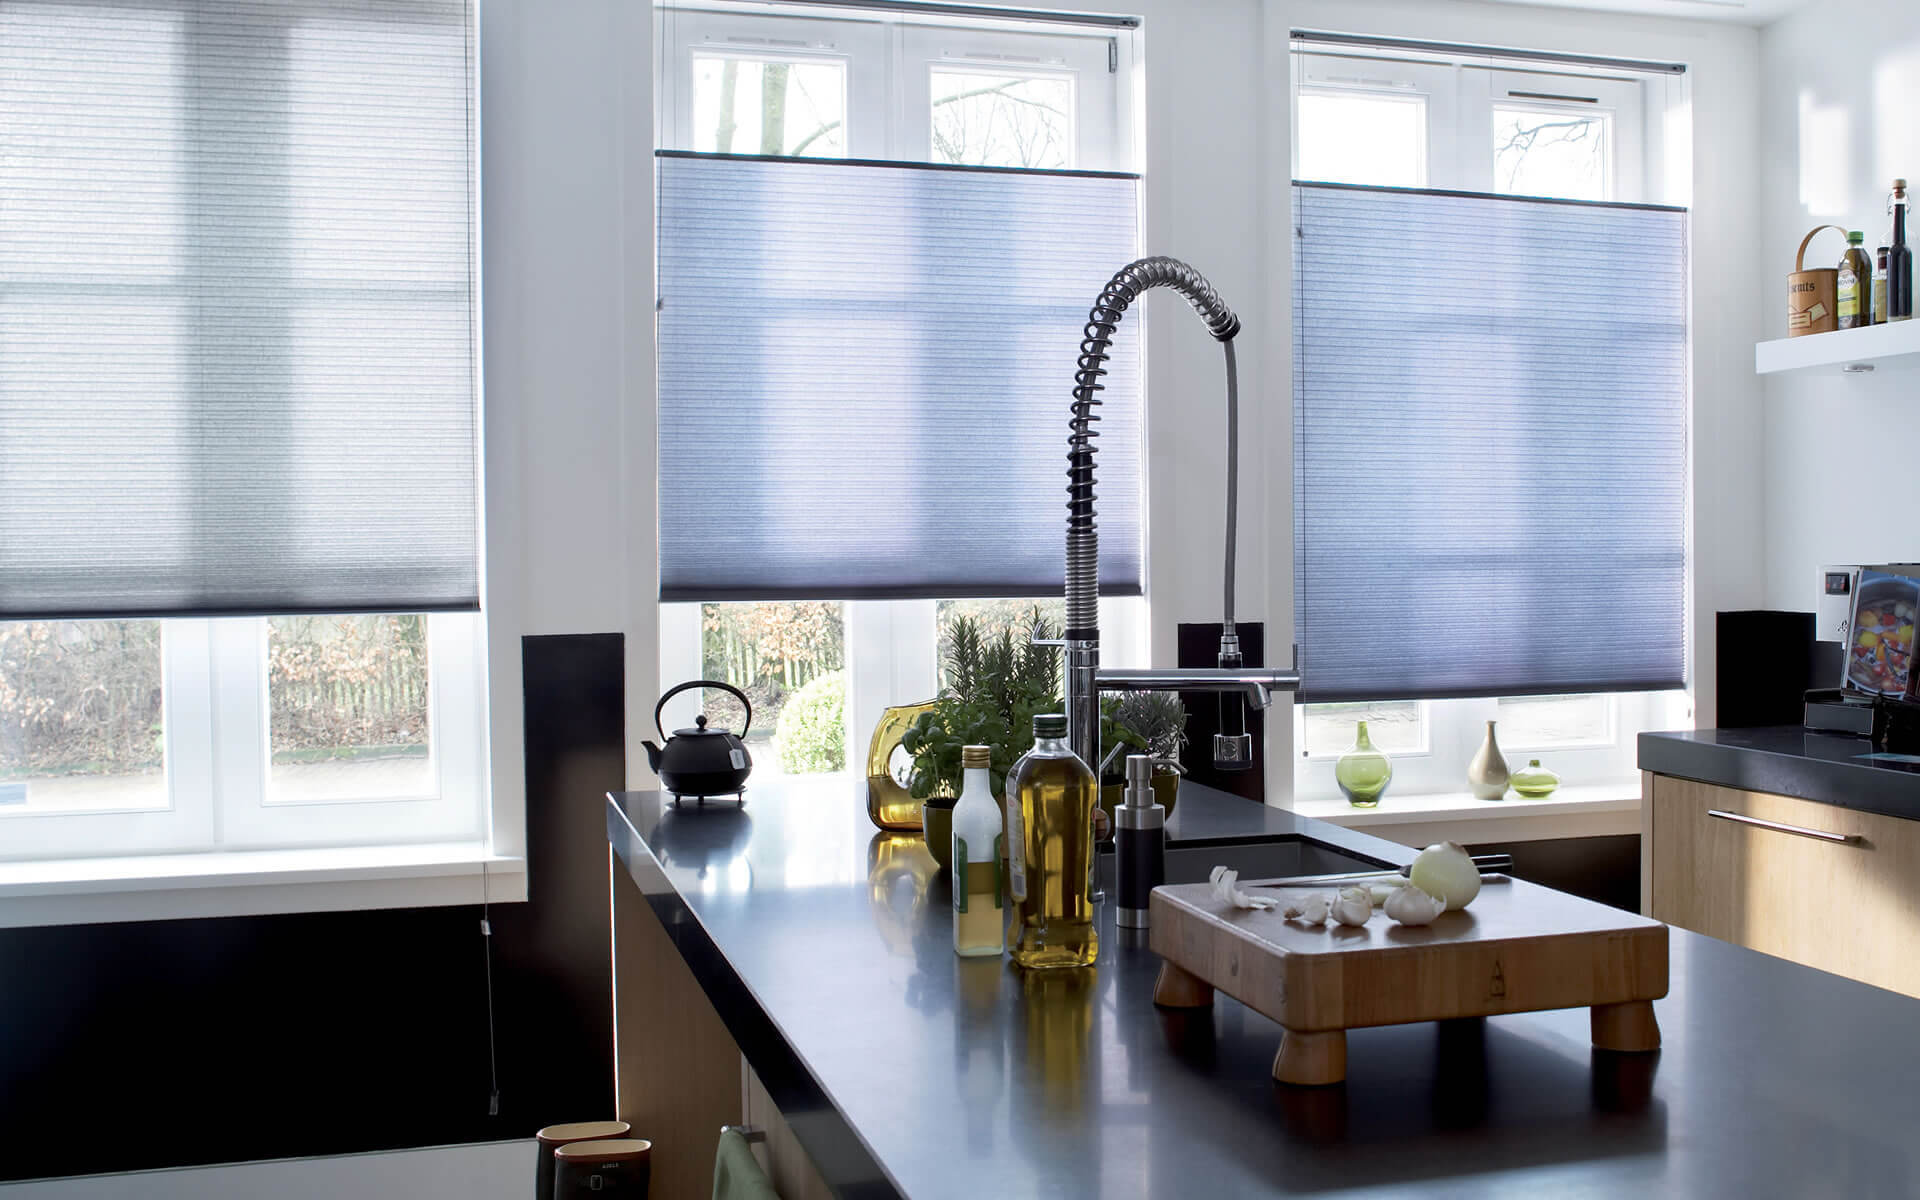 Commercial Cellular Blinds Offer Privacy and Versatility